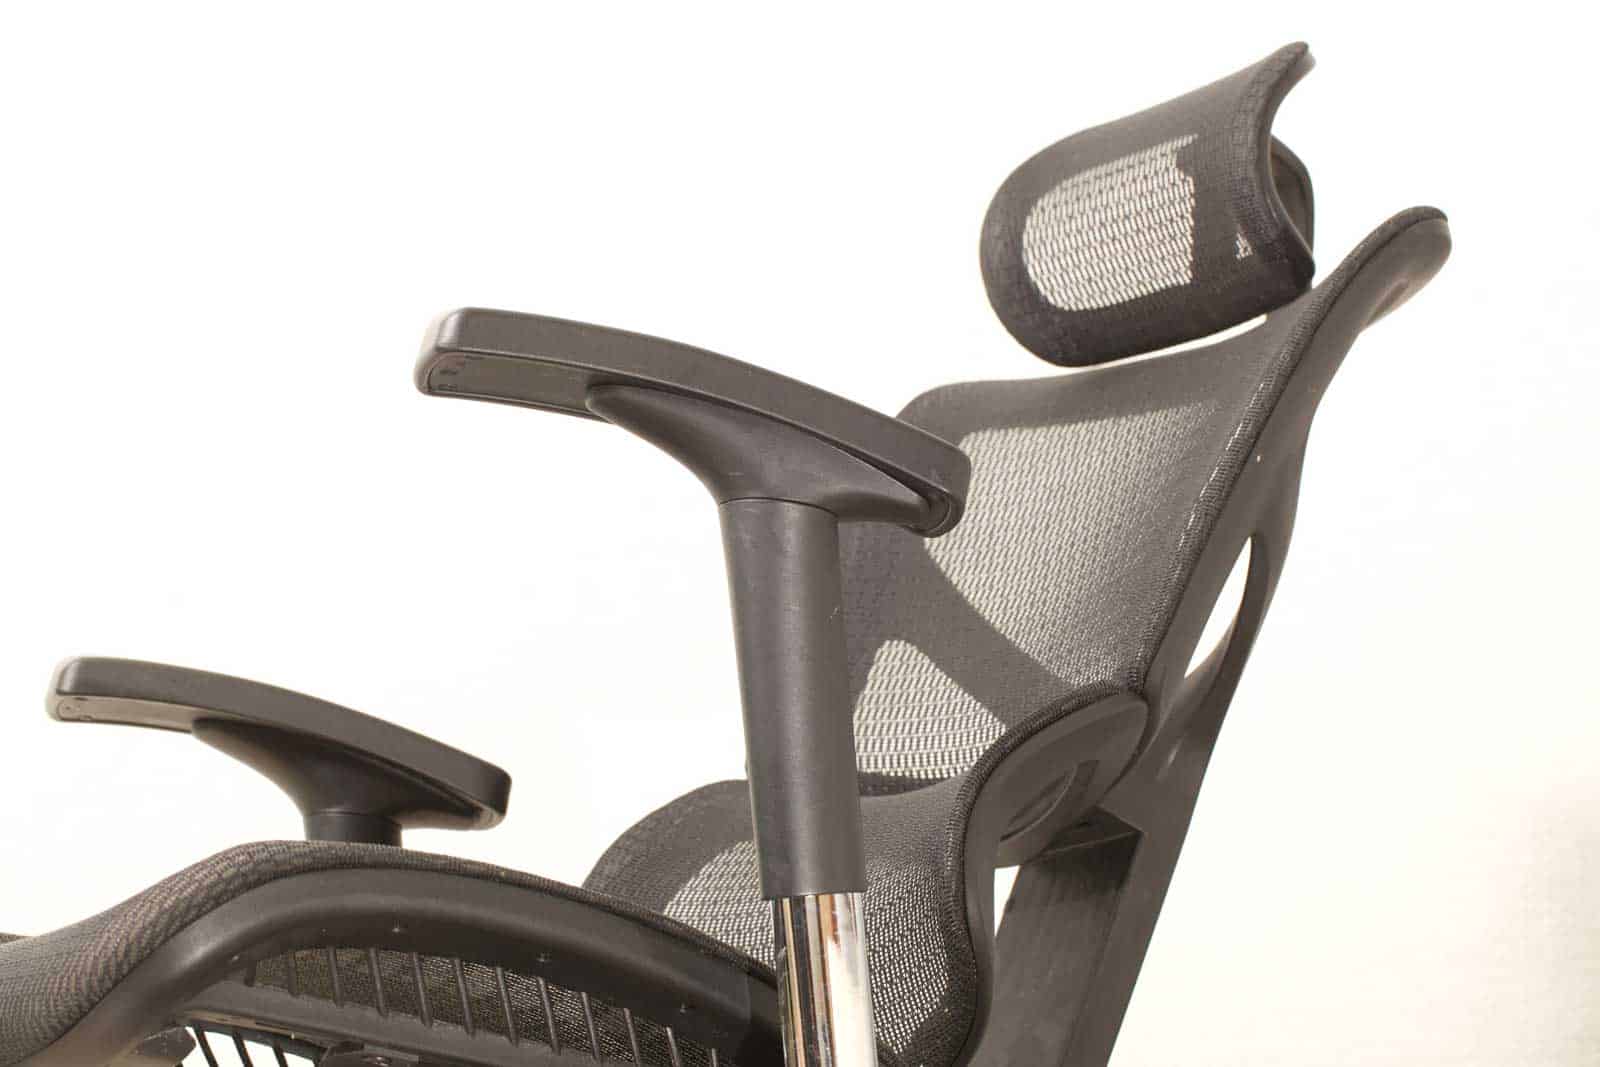 Why Are Ergonomic Chairs So Expensive?